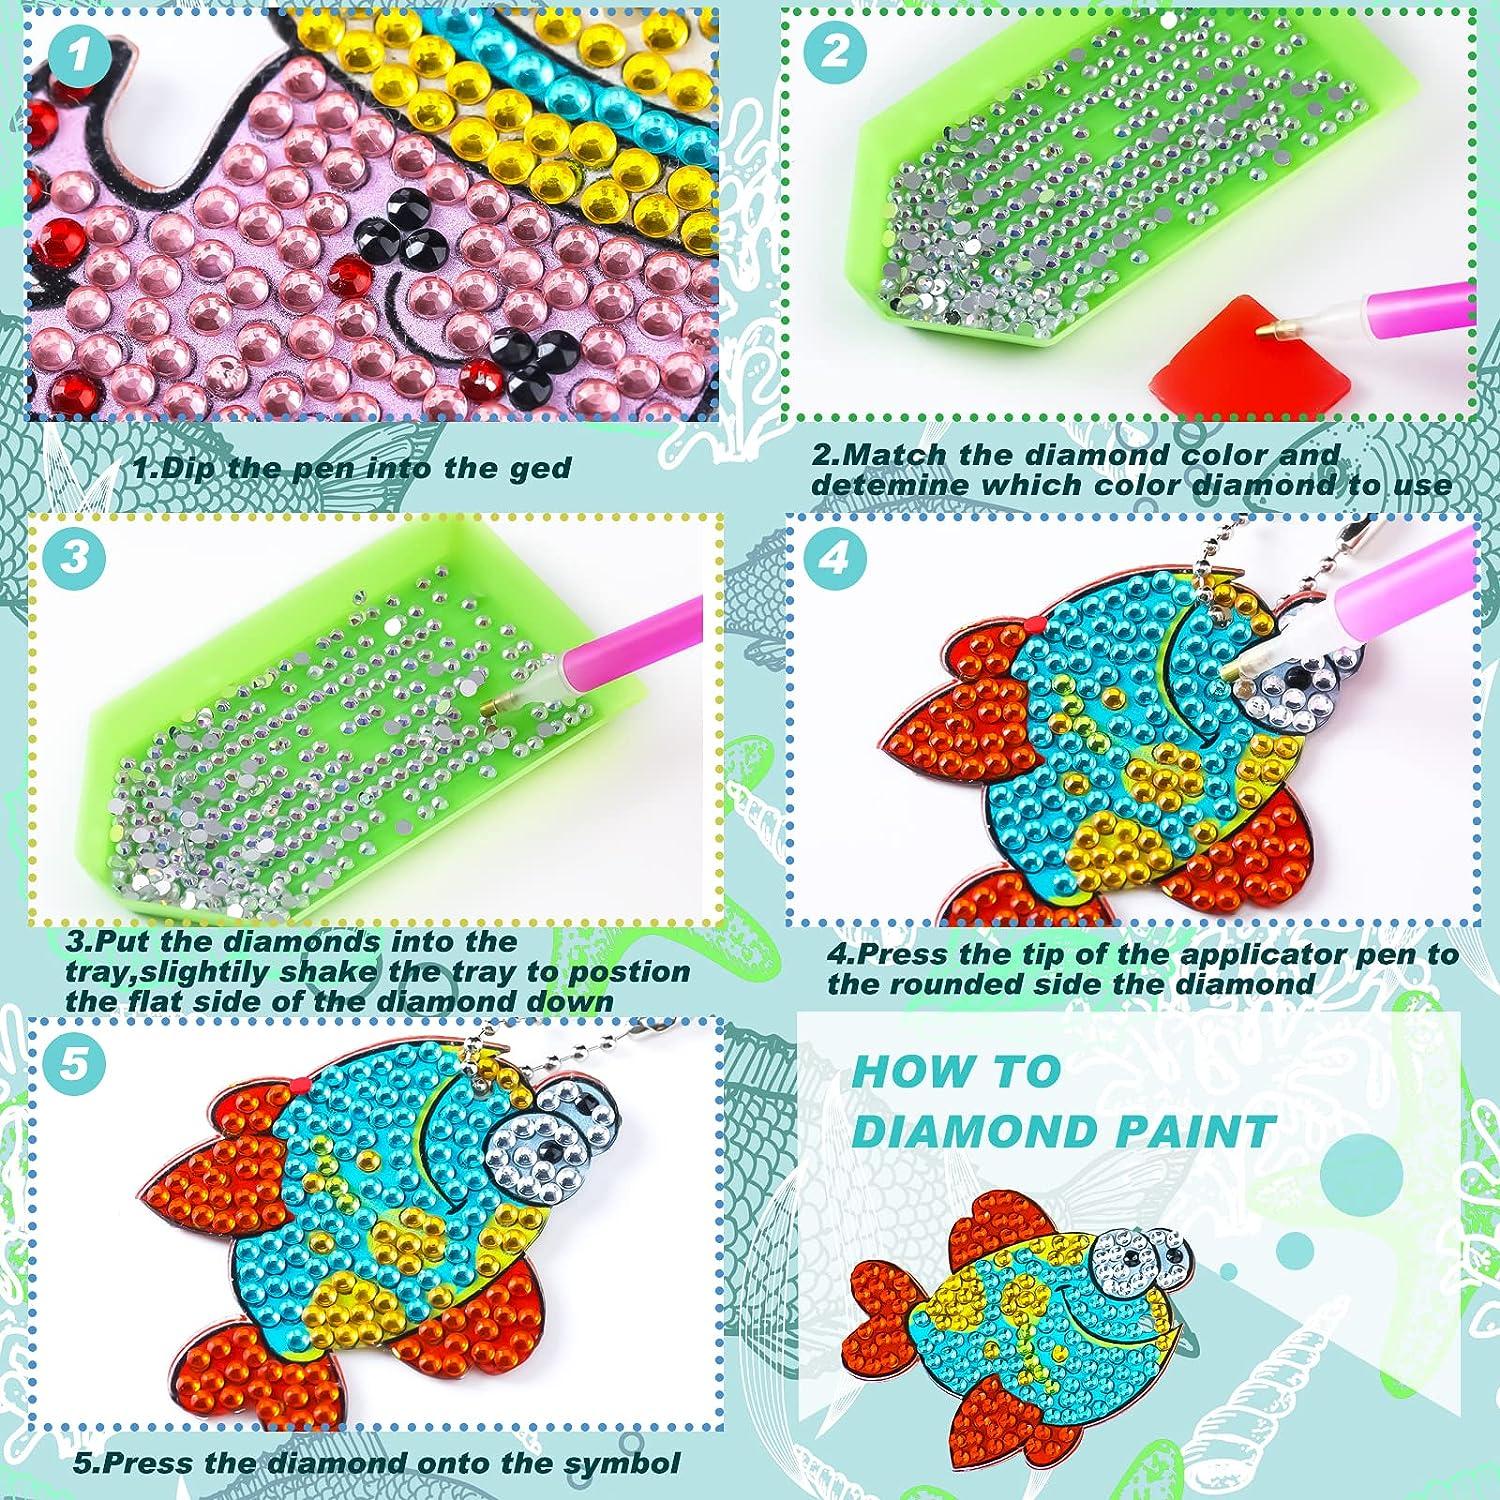 Arts & Crafts Gem Art Kit for Girls Ages 8-12. Diamond Painting